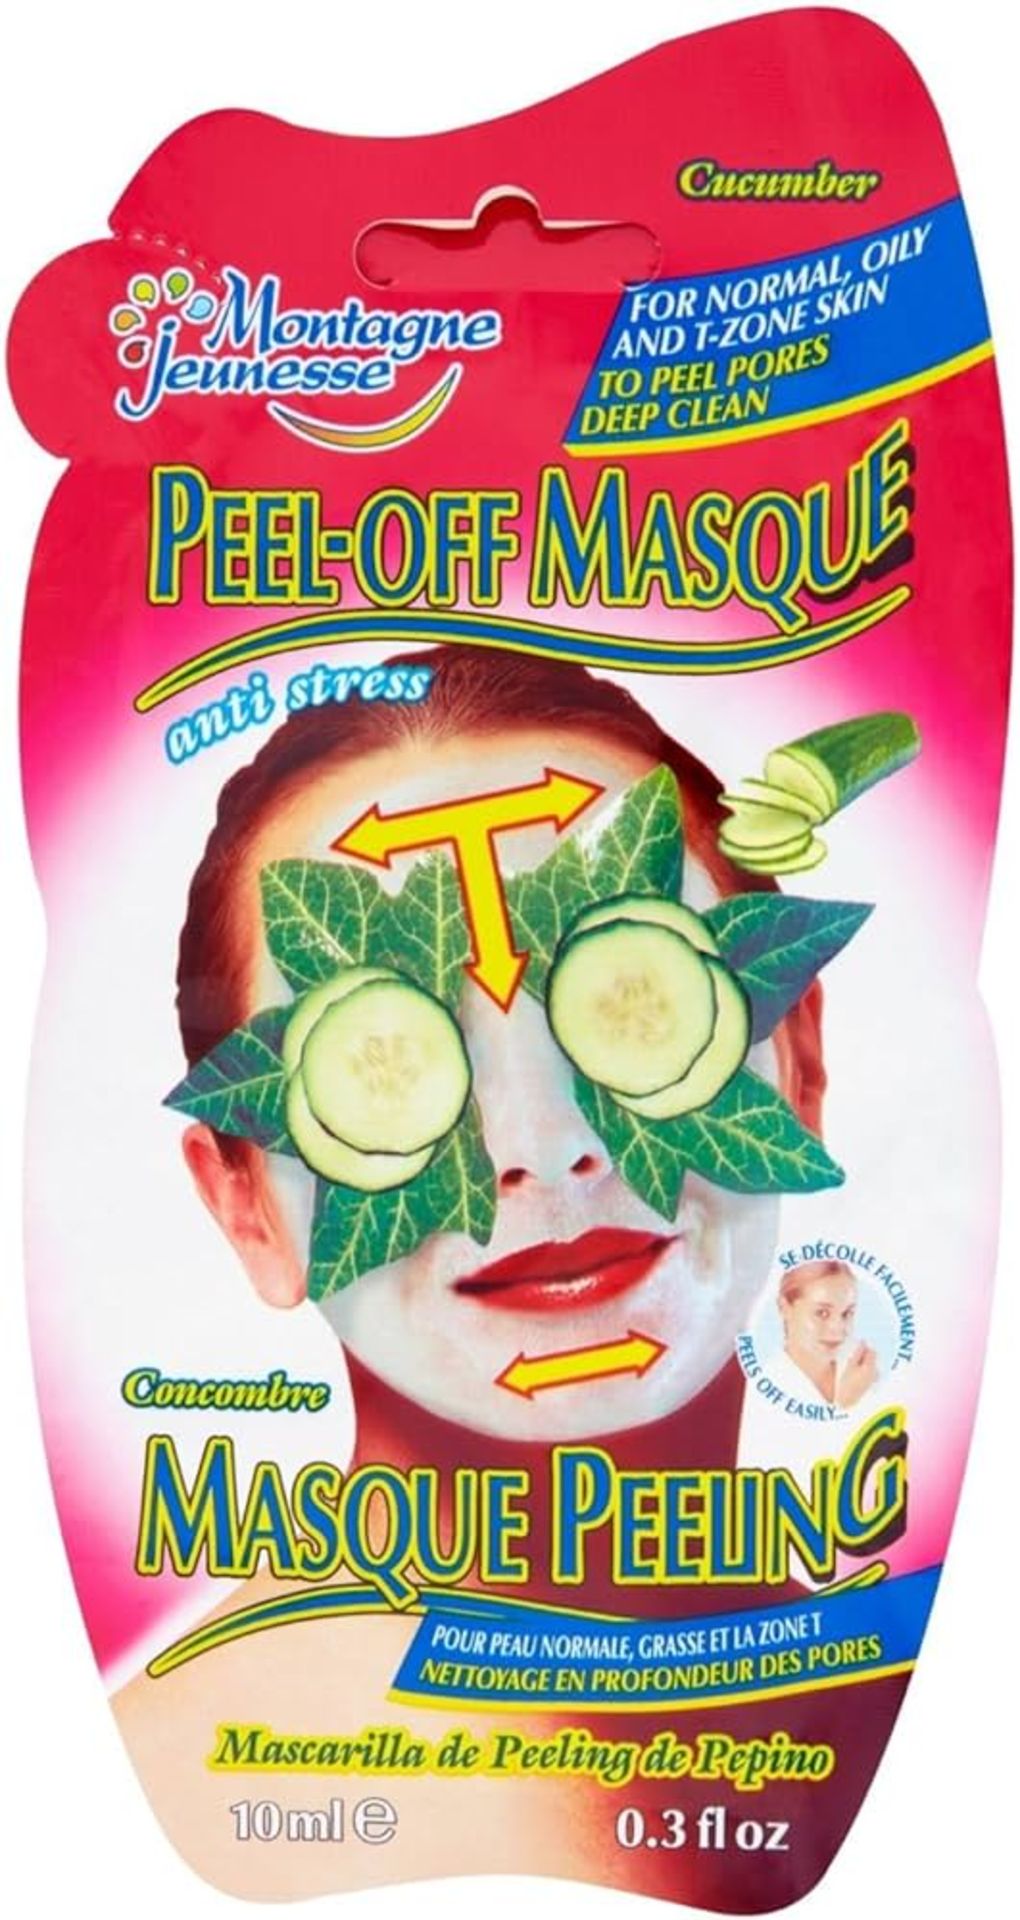 Bulk Trade Lot 200 x Montagne Jeunesse Face Masks. RRPs Vary from £2.50 - £6. This lot has a RRP - Image 12 of 16